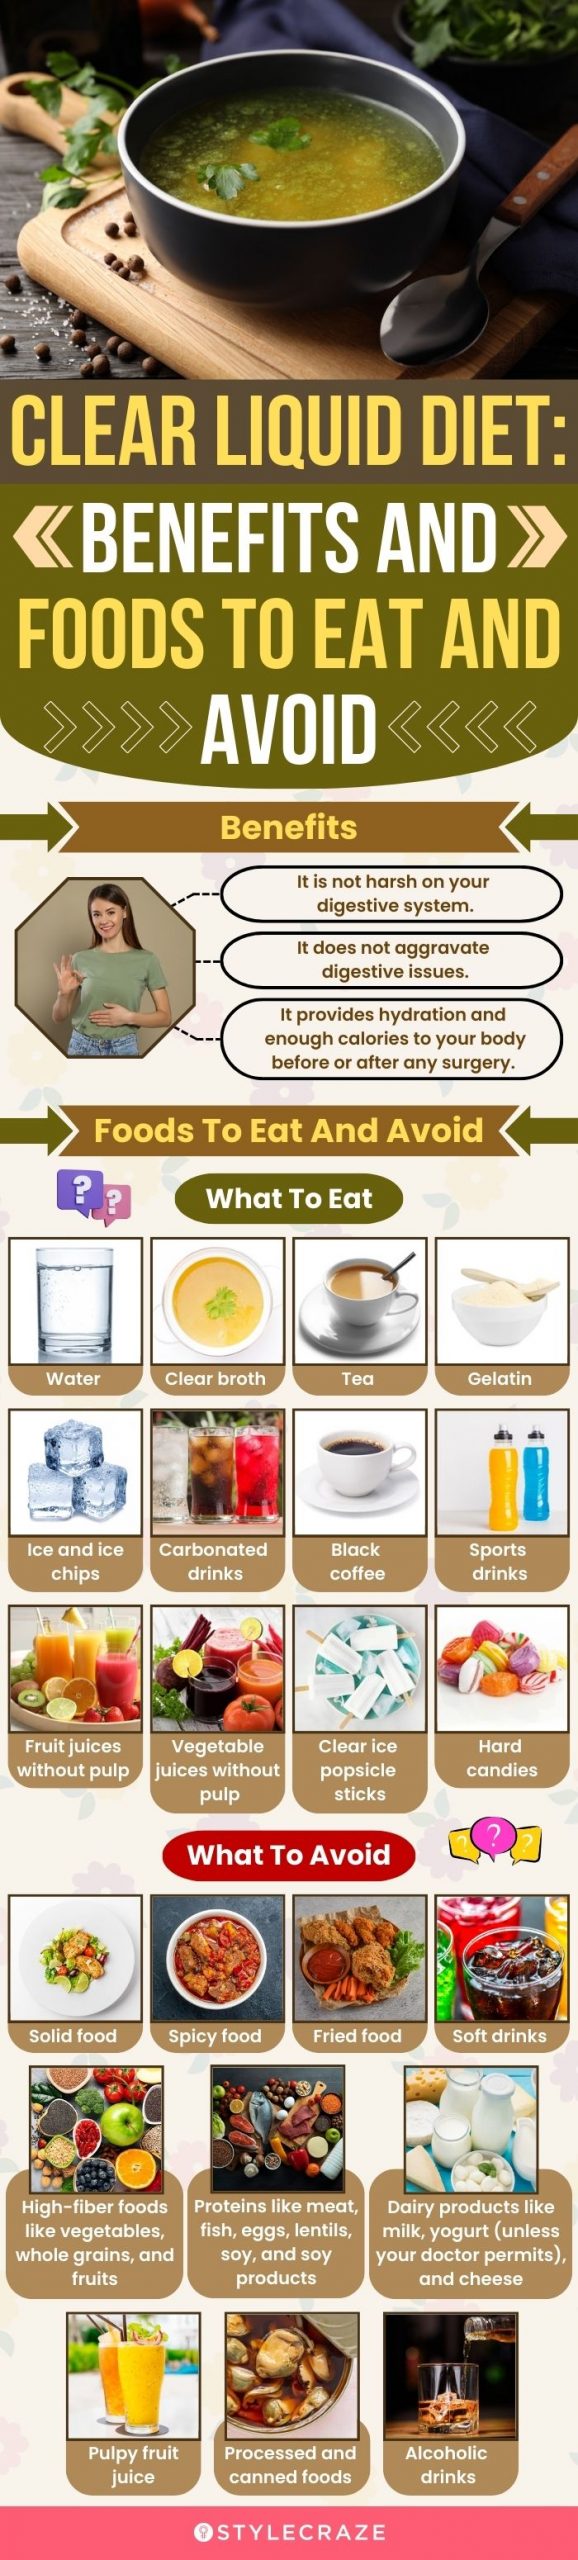 clear liquid diet benefits and foods to eat and avoid (infographic)